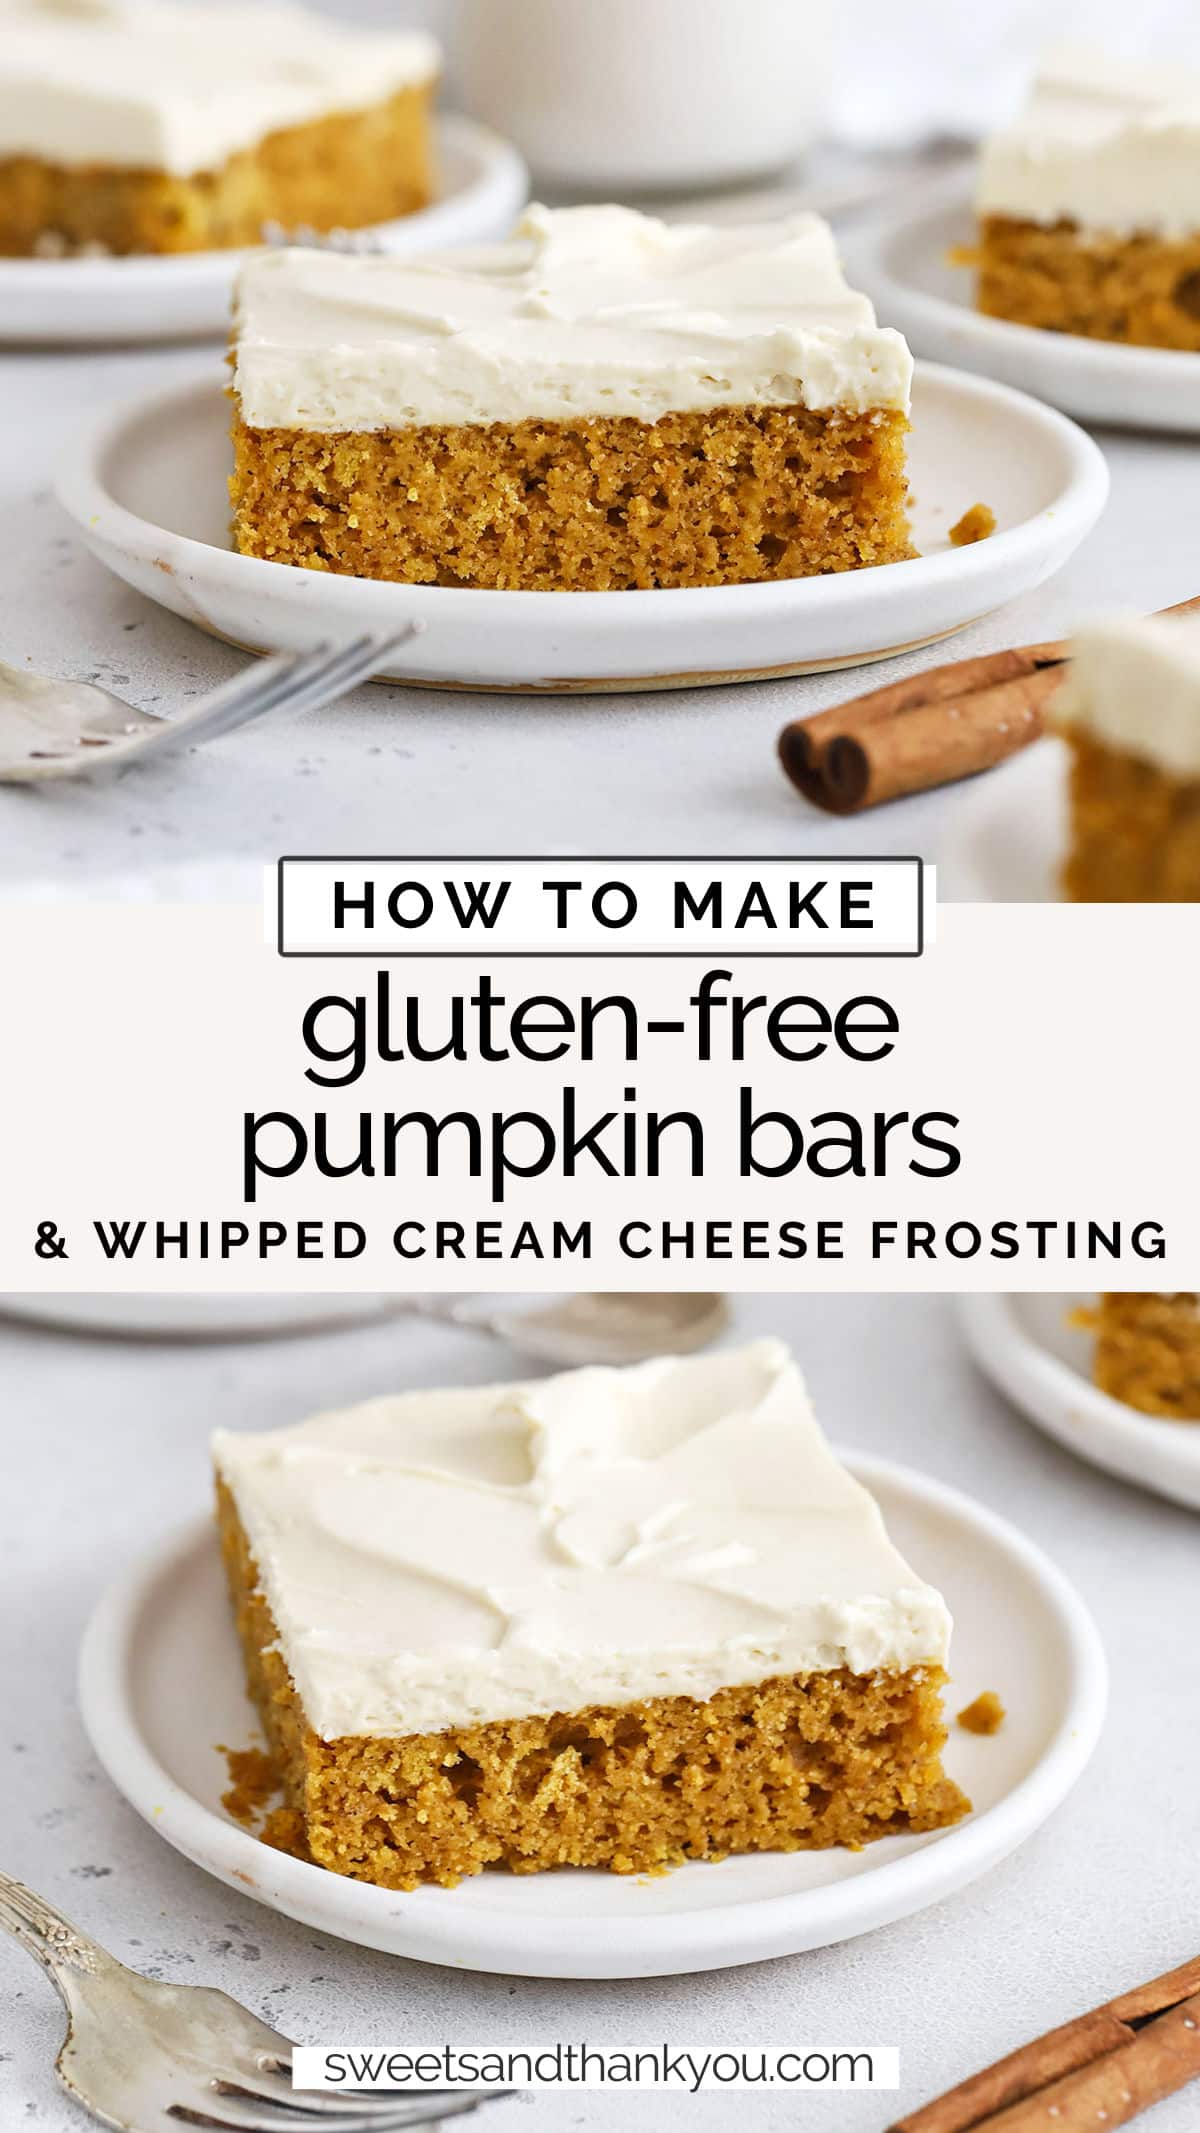 Gluten-Free Pumpkin Bars - This easy gluten-free pumpkin bars recipe is laced with warm spices & topped with a light whipped brown sugar cream cheese frosting that's the perfect finish. // the best gluten-free pumpkin bars // gluten-free pumpkin bar recipe // gluten-free pumpkin bars with cream cheese frosting // whipped cream cheese frosting recipe